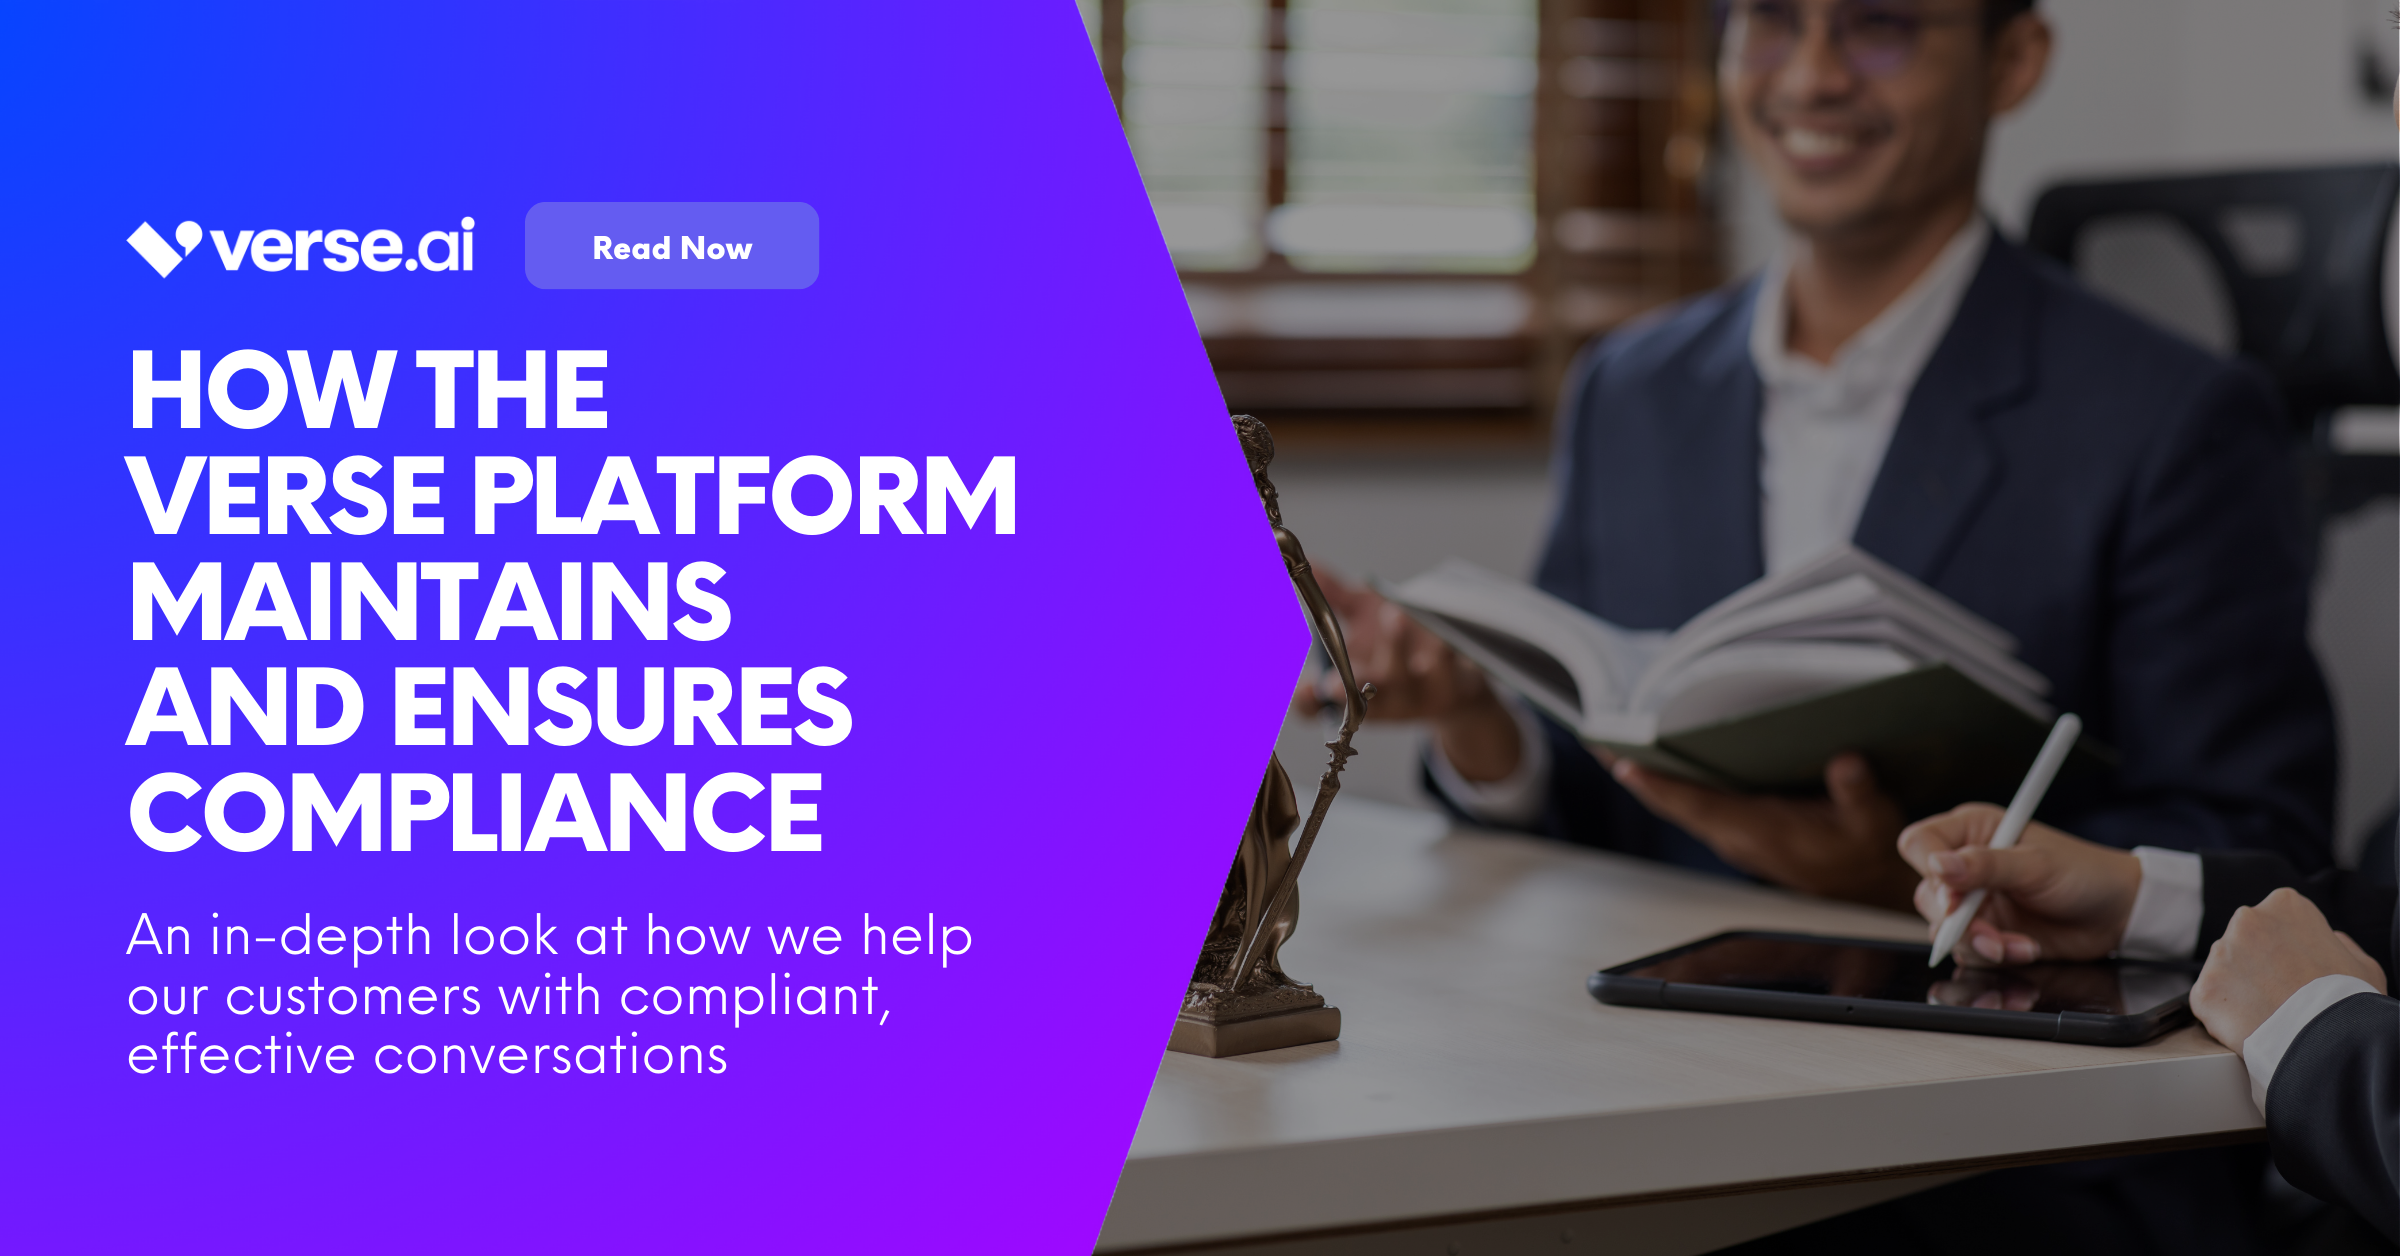 How the Verse Platform Maintains and Ensures Compliance